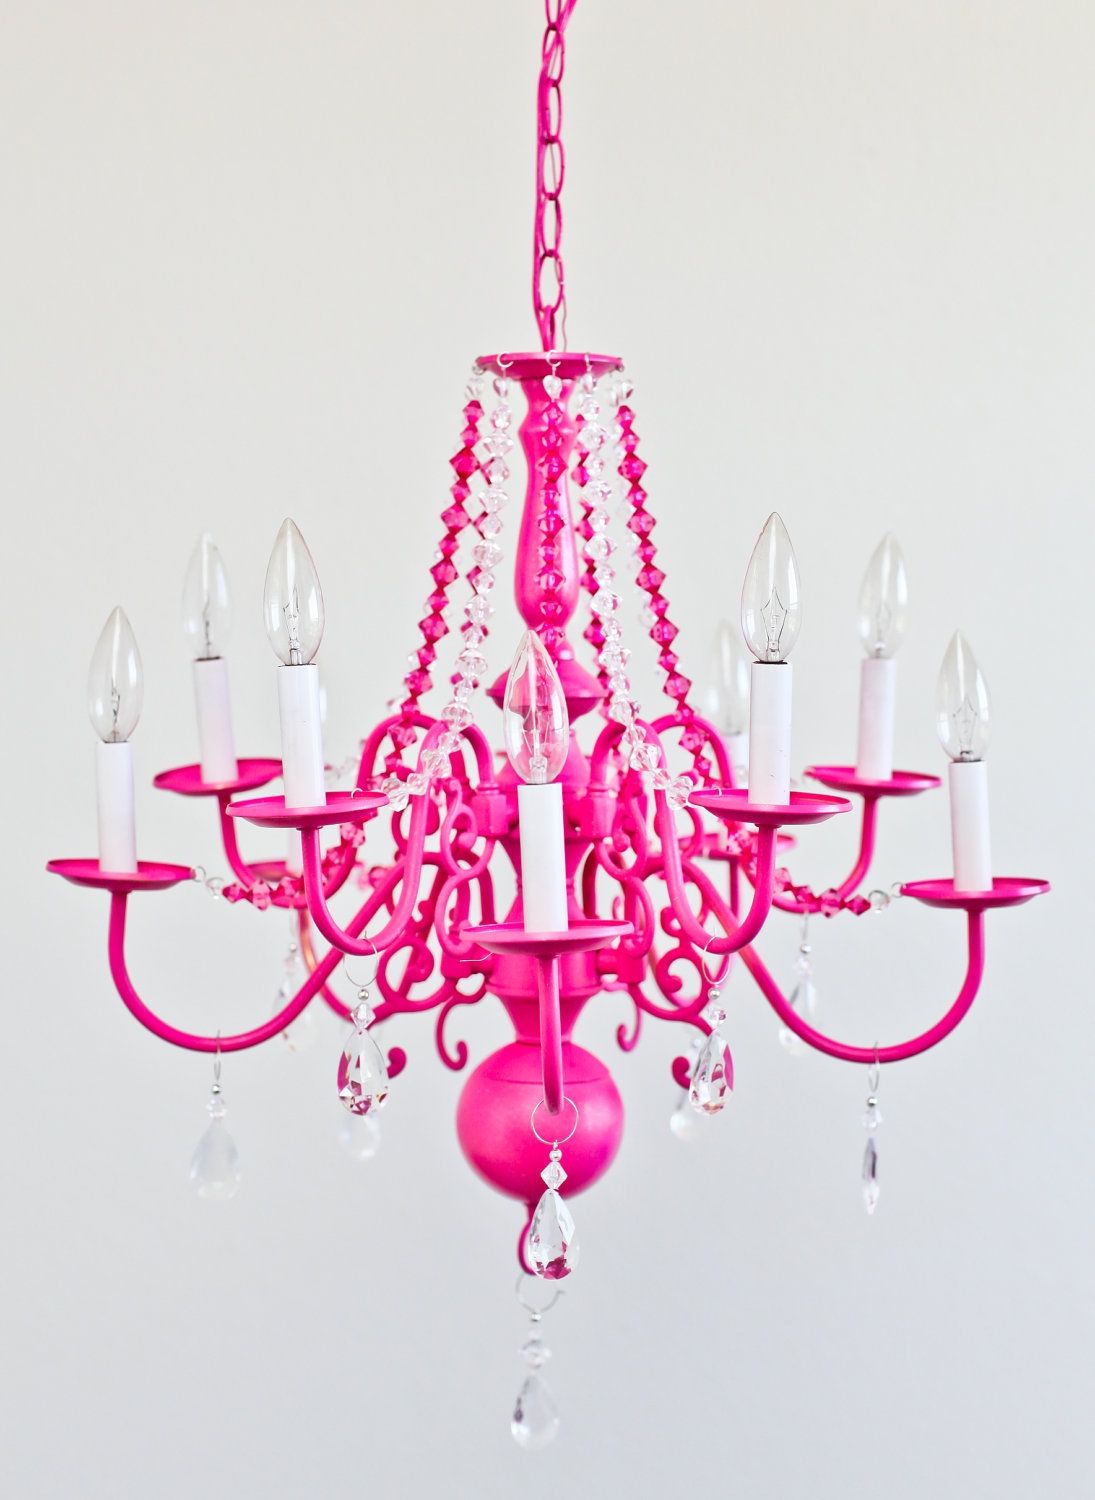 Victorian Mod Custom Chandeliers In Any Color Pink Aqua Blue Regarding Large Turquoise Chandeliers (View 10 of 25)